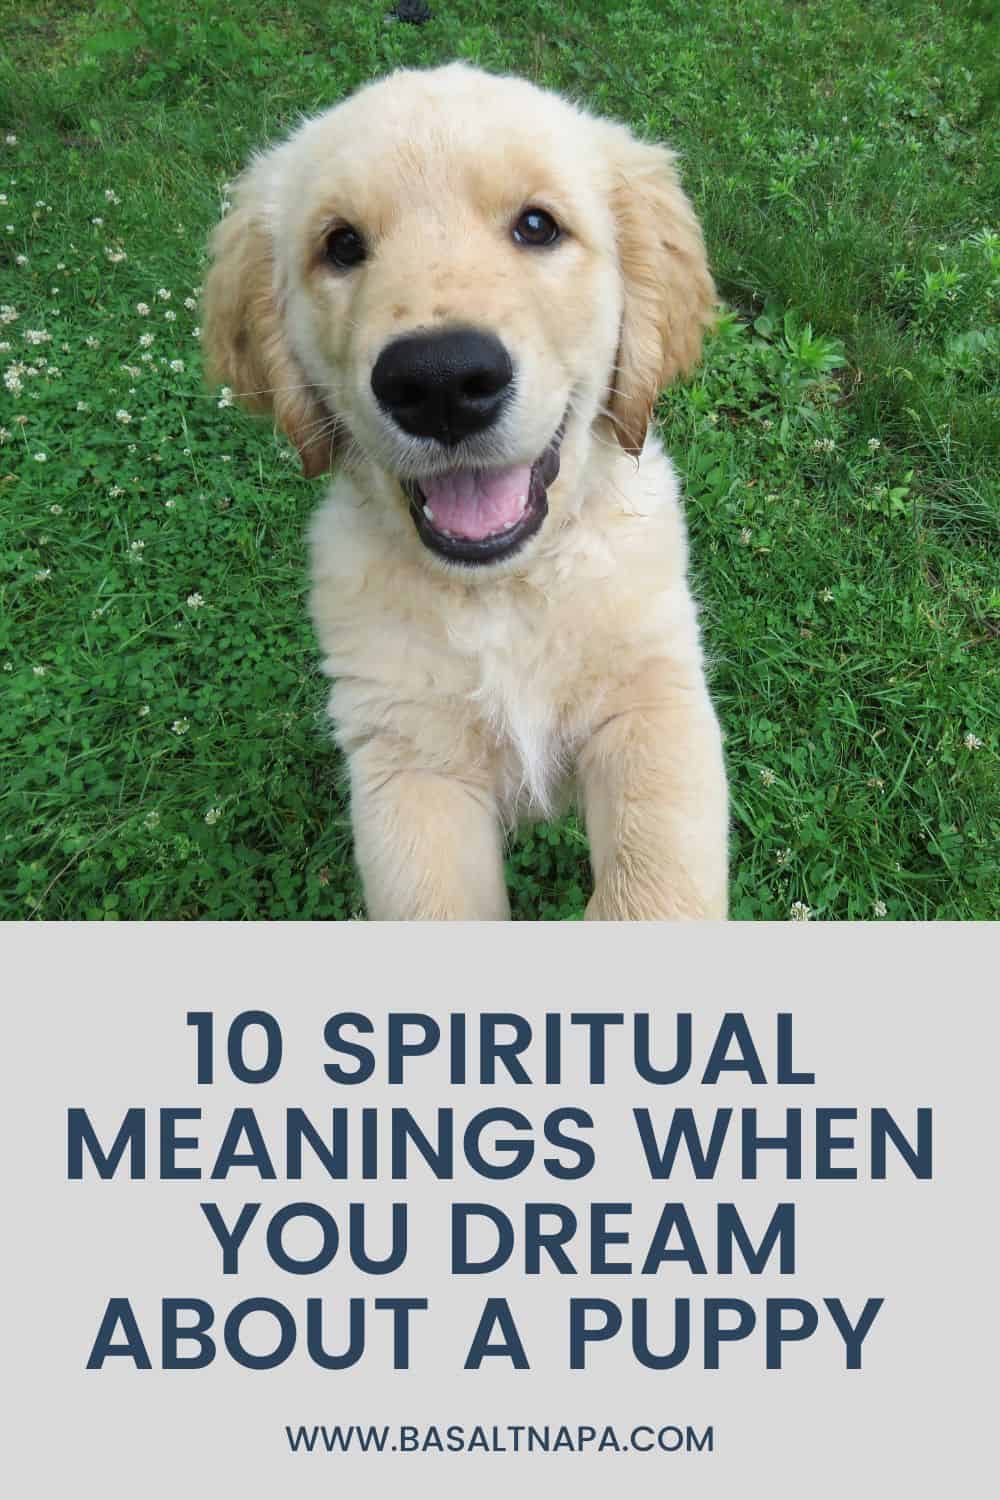 Spiritual Meanings When You Dream About a Puppy 